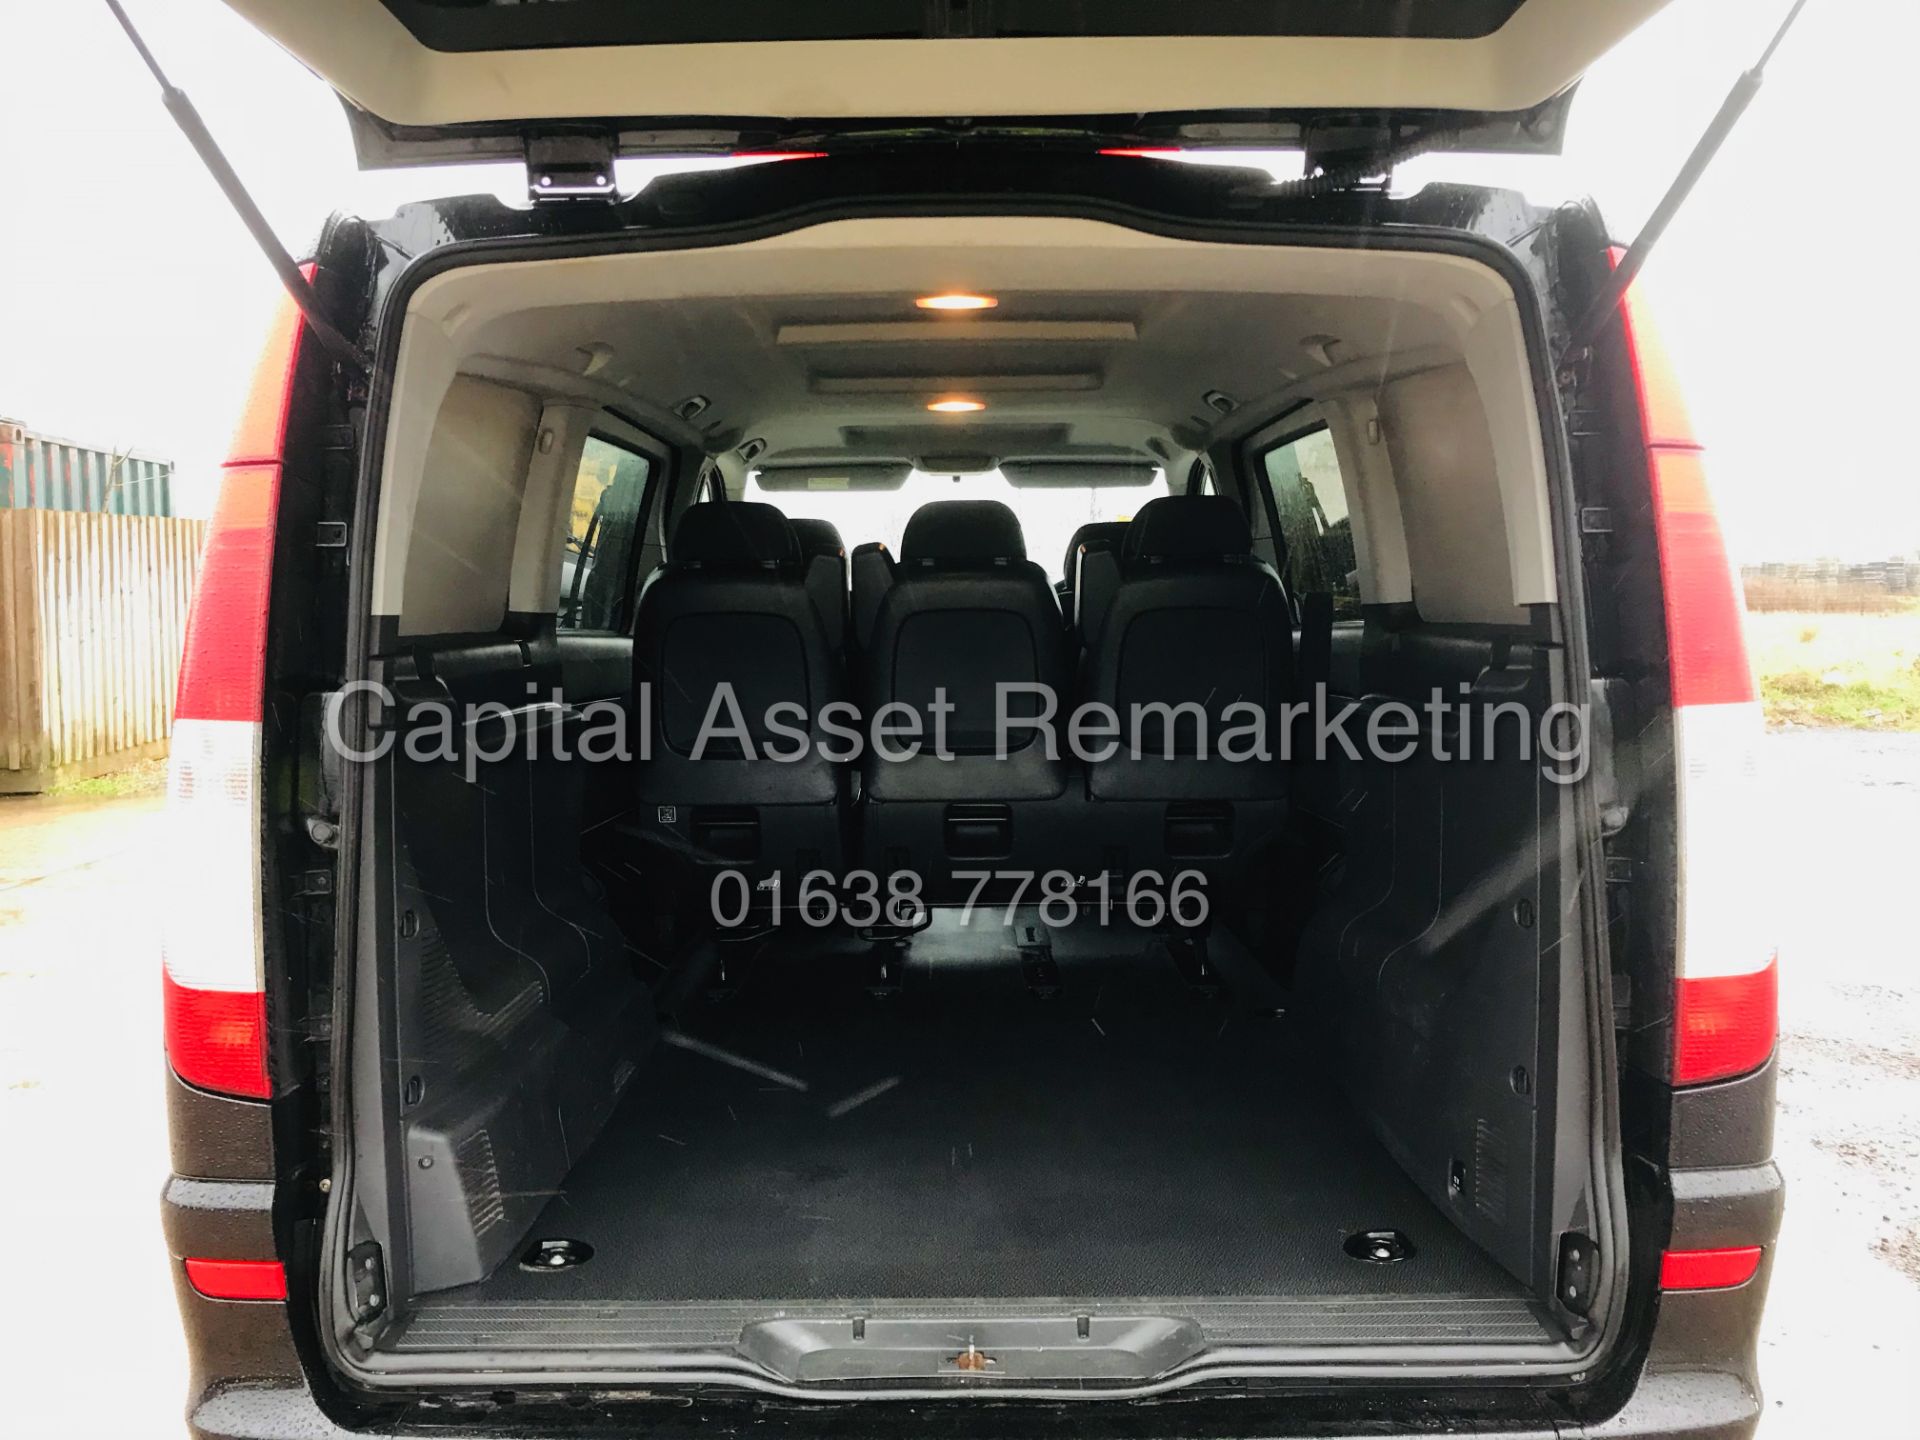 On Sale MERCEDES VITO 116CDI "SPORT"LWB 5 SEATER DUALINER (14 REG) GREAT SPEC *AC* CRUISE - ALLOYS - Image 18 of 23